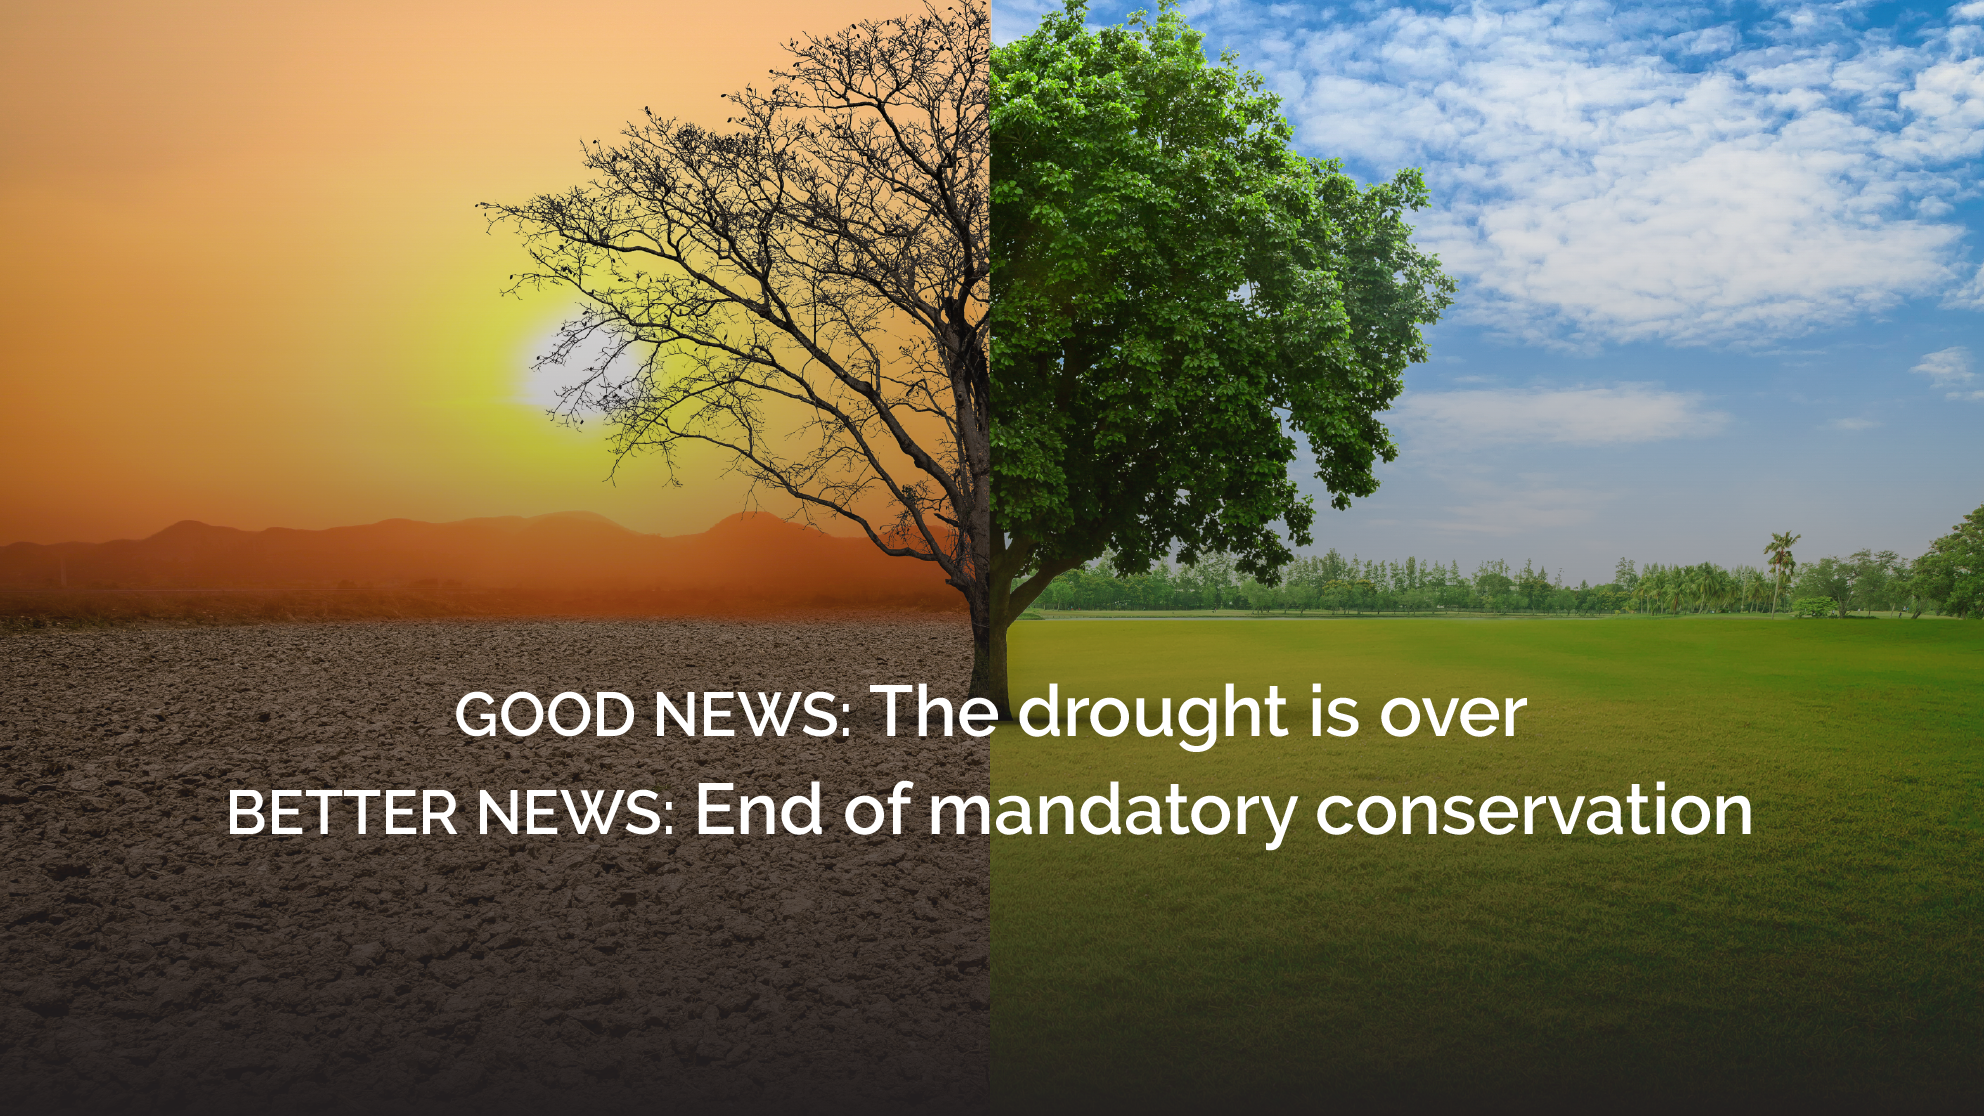 Graphic with text: Good news: the drought is over. Better news: end of mandatory conservation